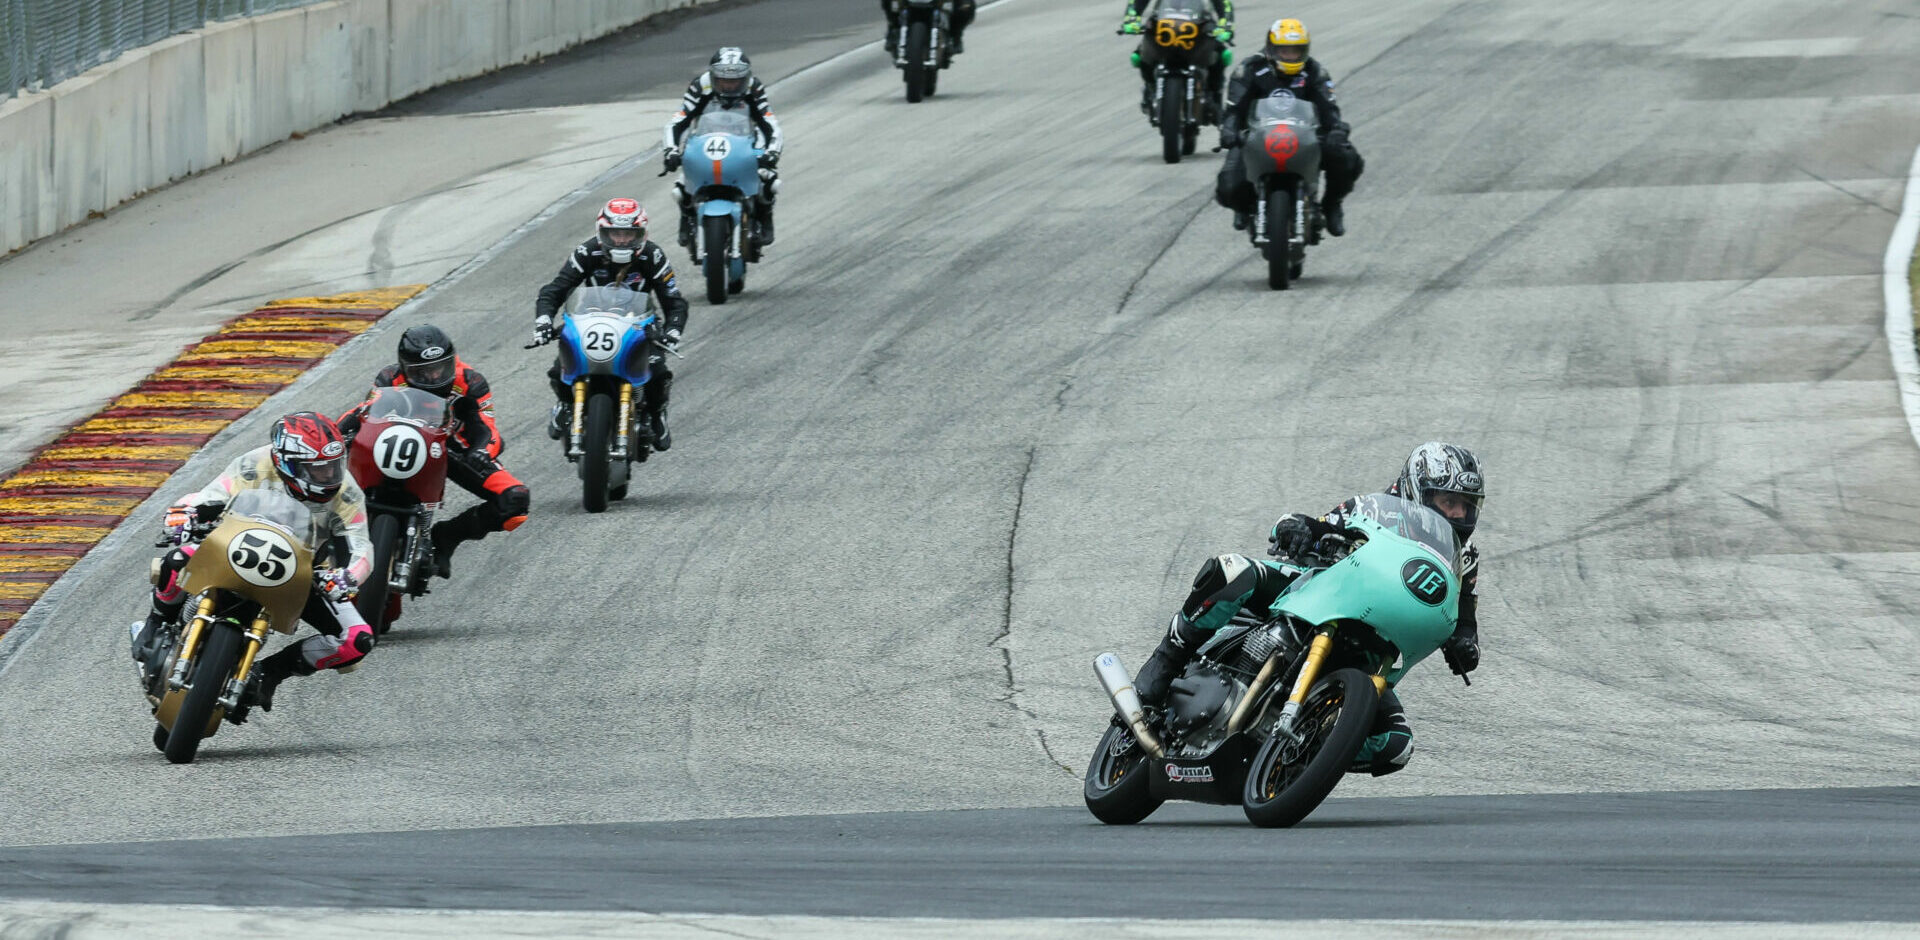 Action from the Royal Enfield Build. Train. Race. race at Road America in 2022 with Kayleigh Buyck (16) leading from the start. Photo by Brian J. Nelson.